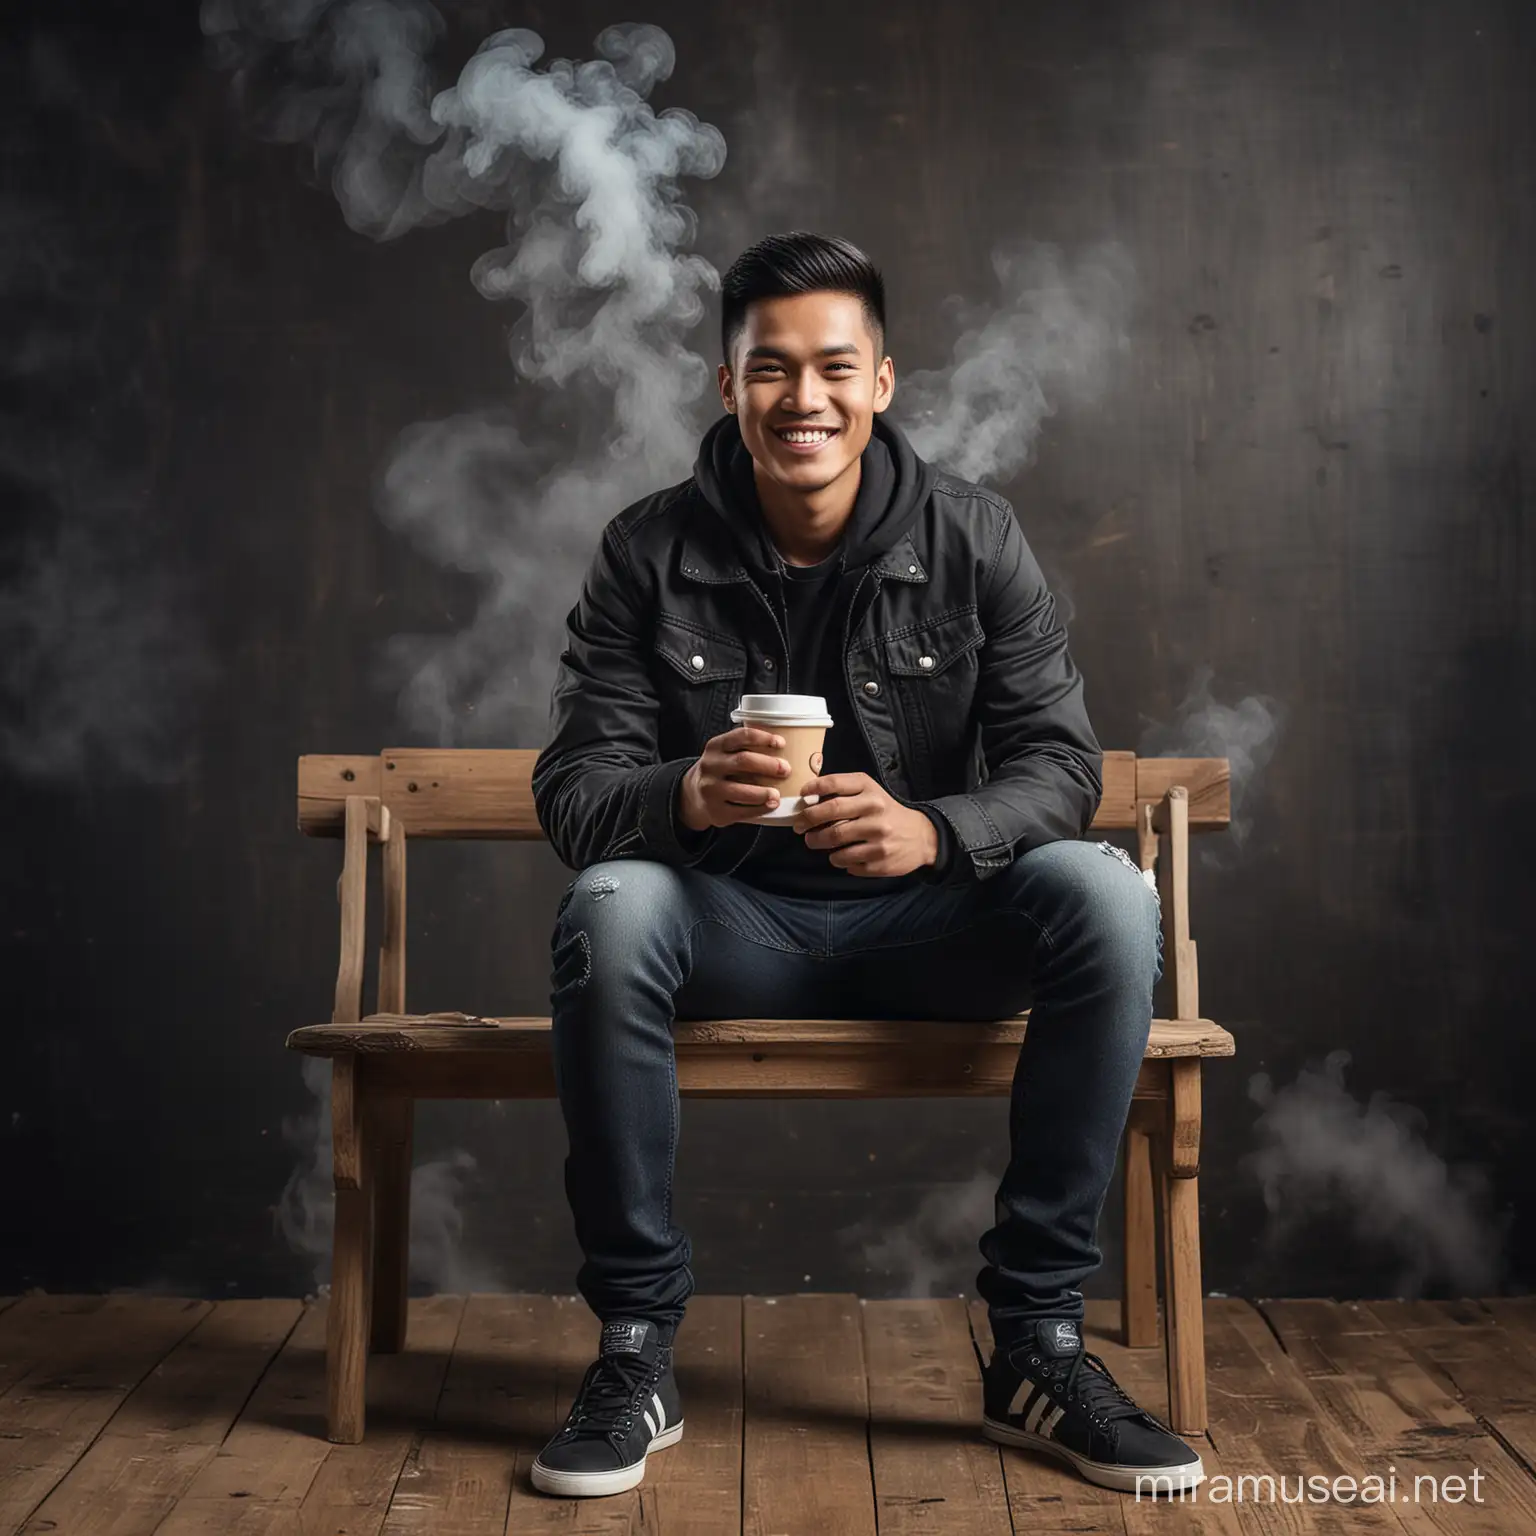 a young man, Indonesian face, wearing a black jacket, wearing jeans, wearing sneakers, sitting on a wooden chair, smiling, while carrying a cup of warm coffee, smoke effect, black rustic photography background, UHD, Hasselblad X1D II&nbsp; 50c Camera, iso 200